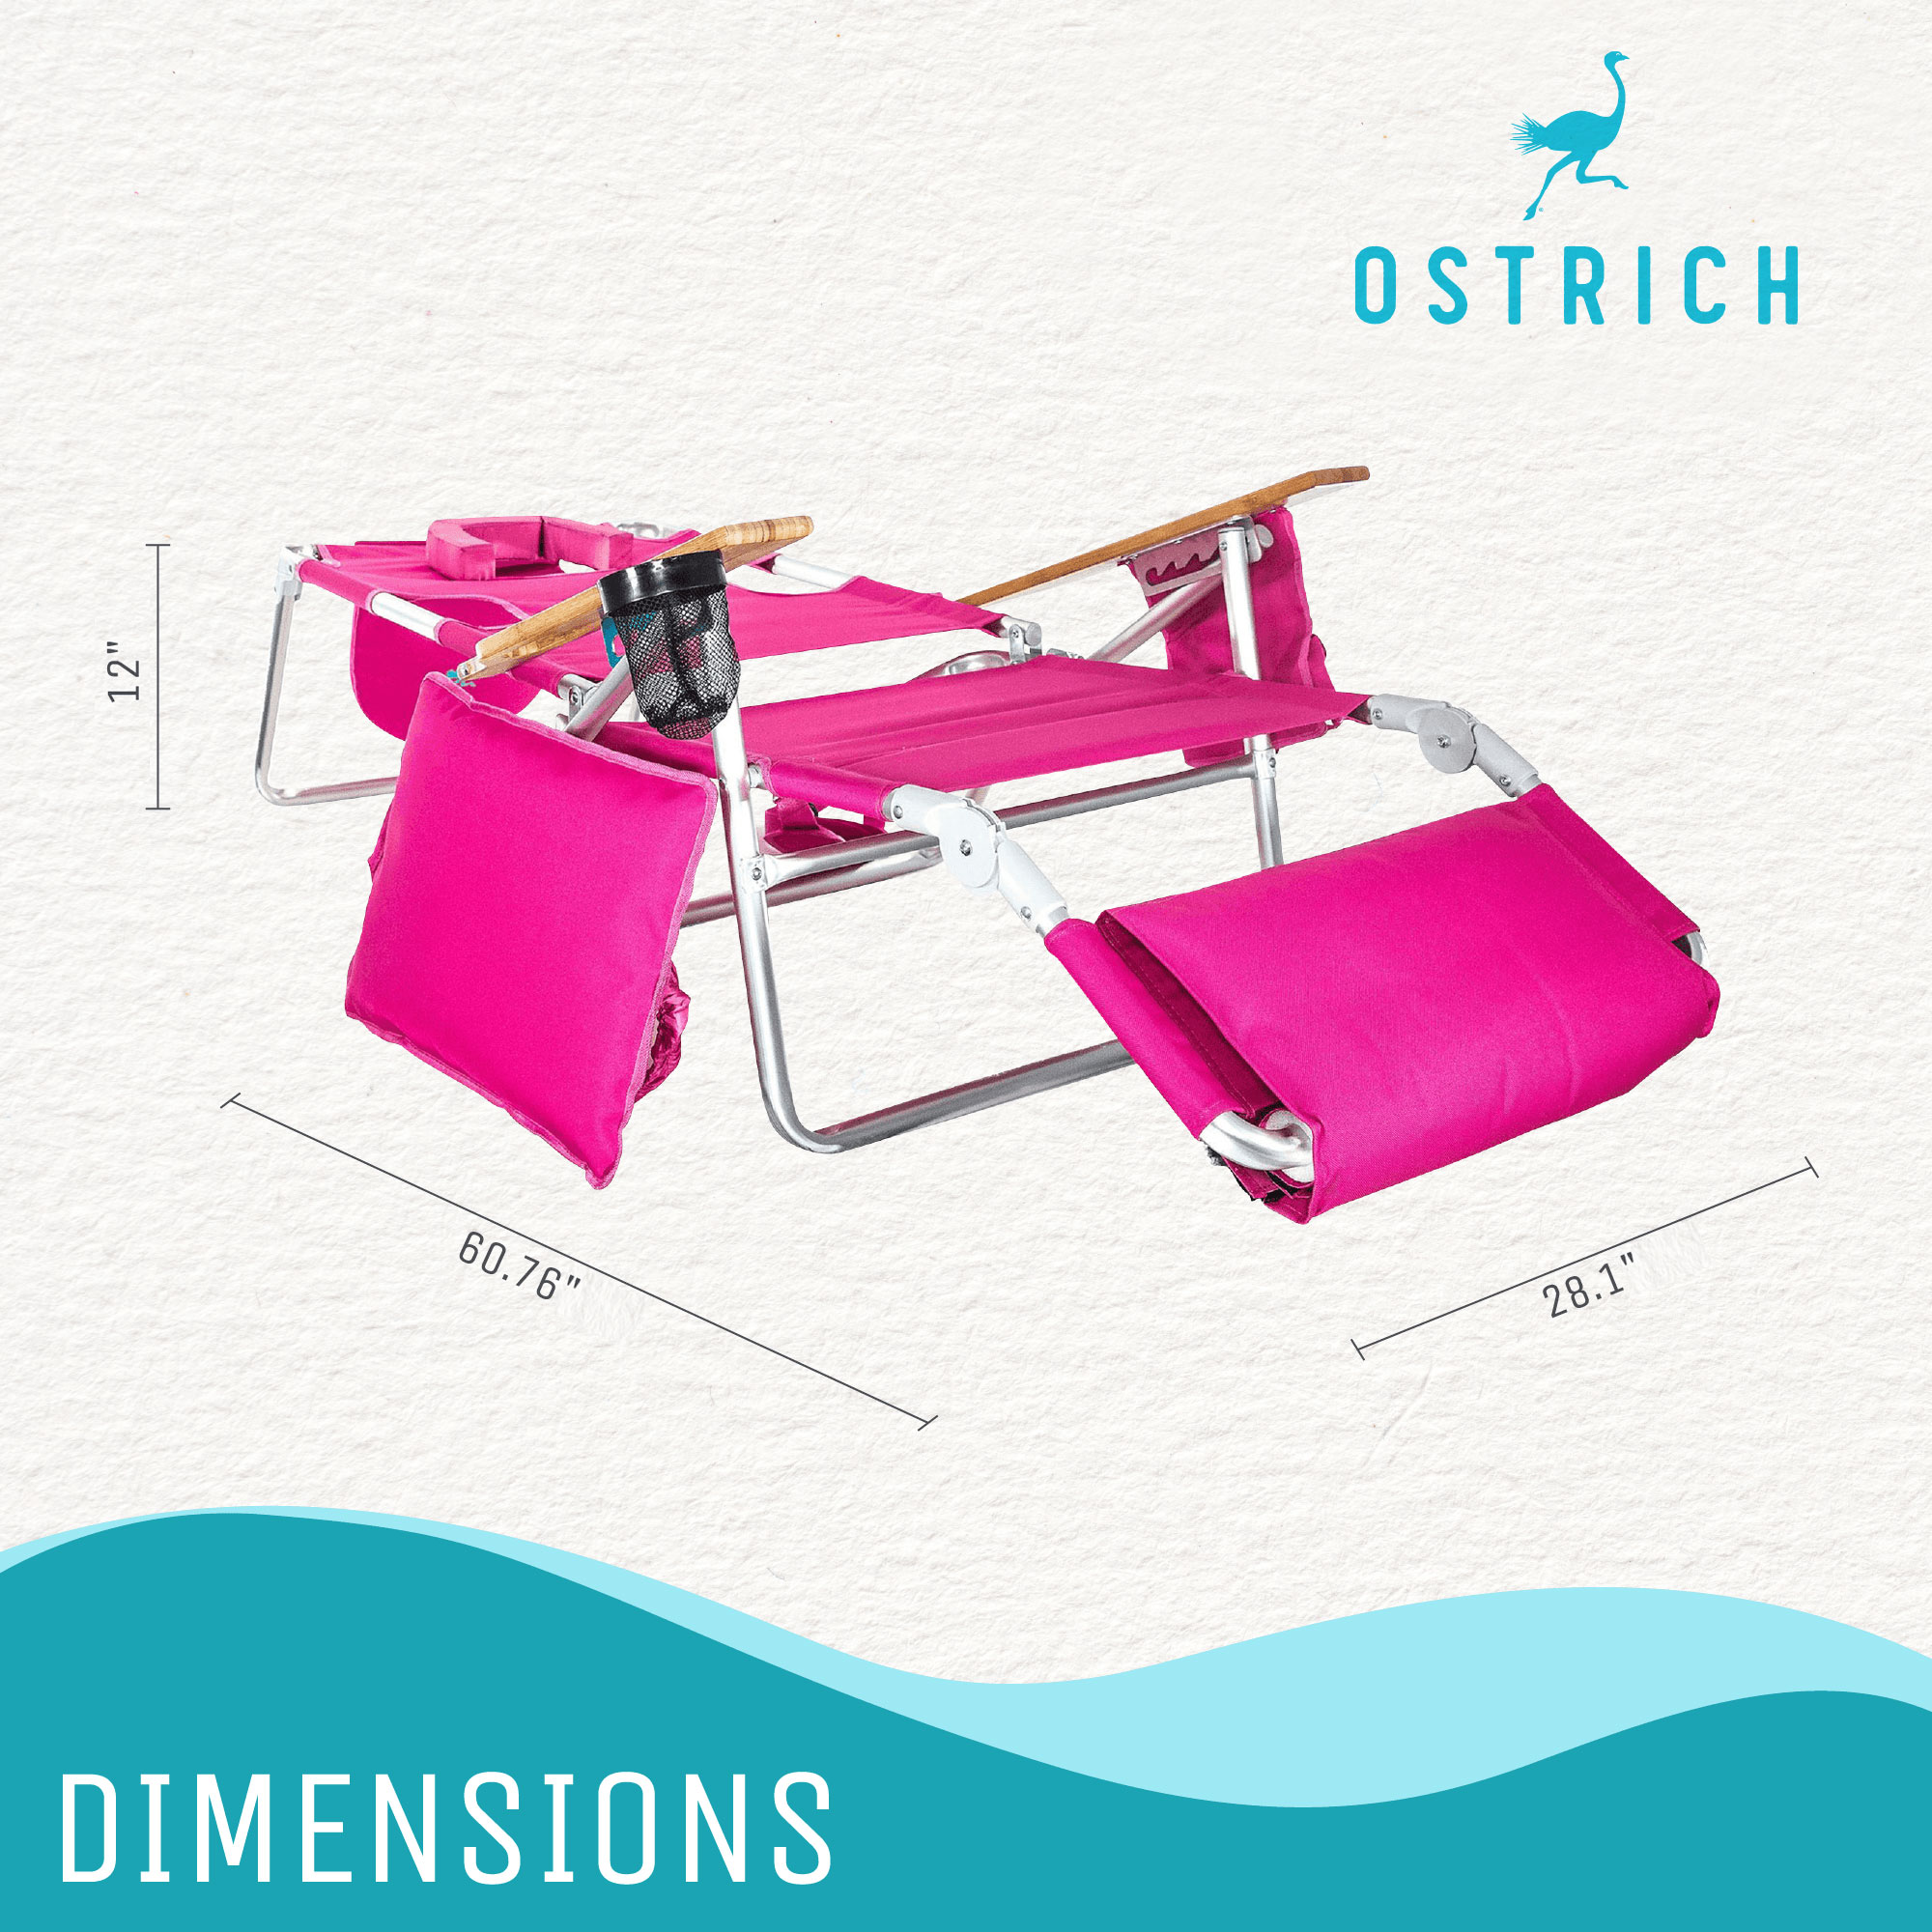 Ostrich Deluxe 3N1 Lightweight Outdoor Beach Lounge Chair w/Footrest, Pink - image 2 of 9